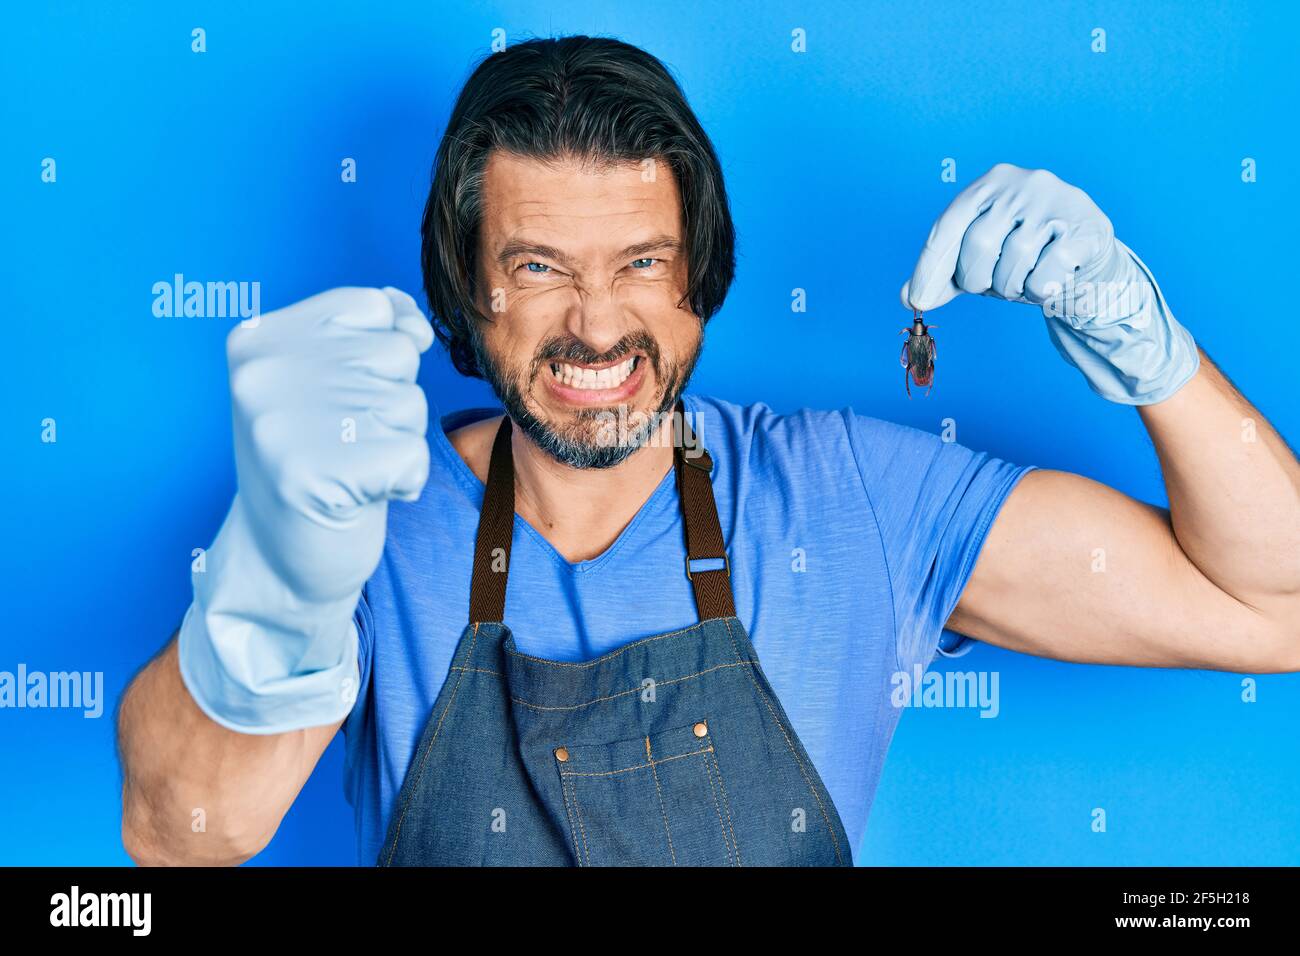 Middle age caucasian man holding cockroach annoyed and frustrated shouting with anger, yelling crazy with anger and hand raised Stock Photo